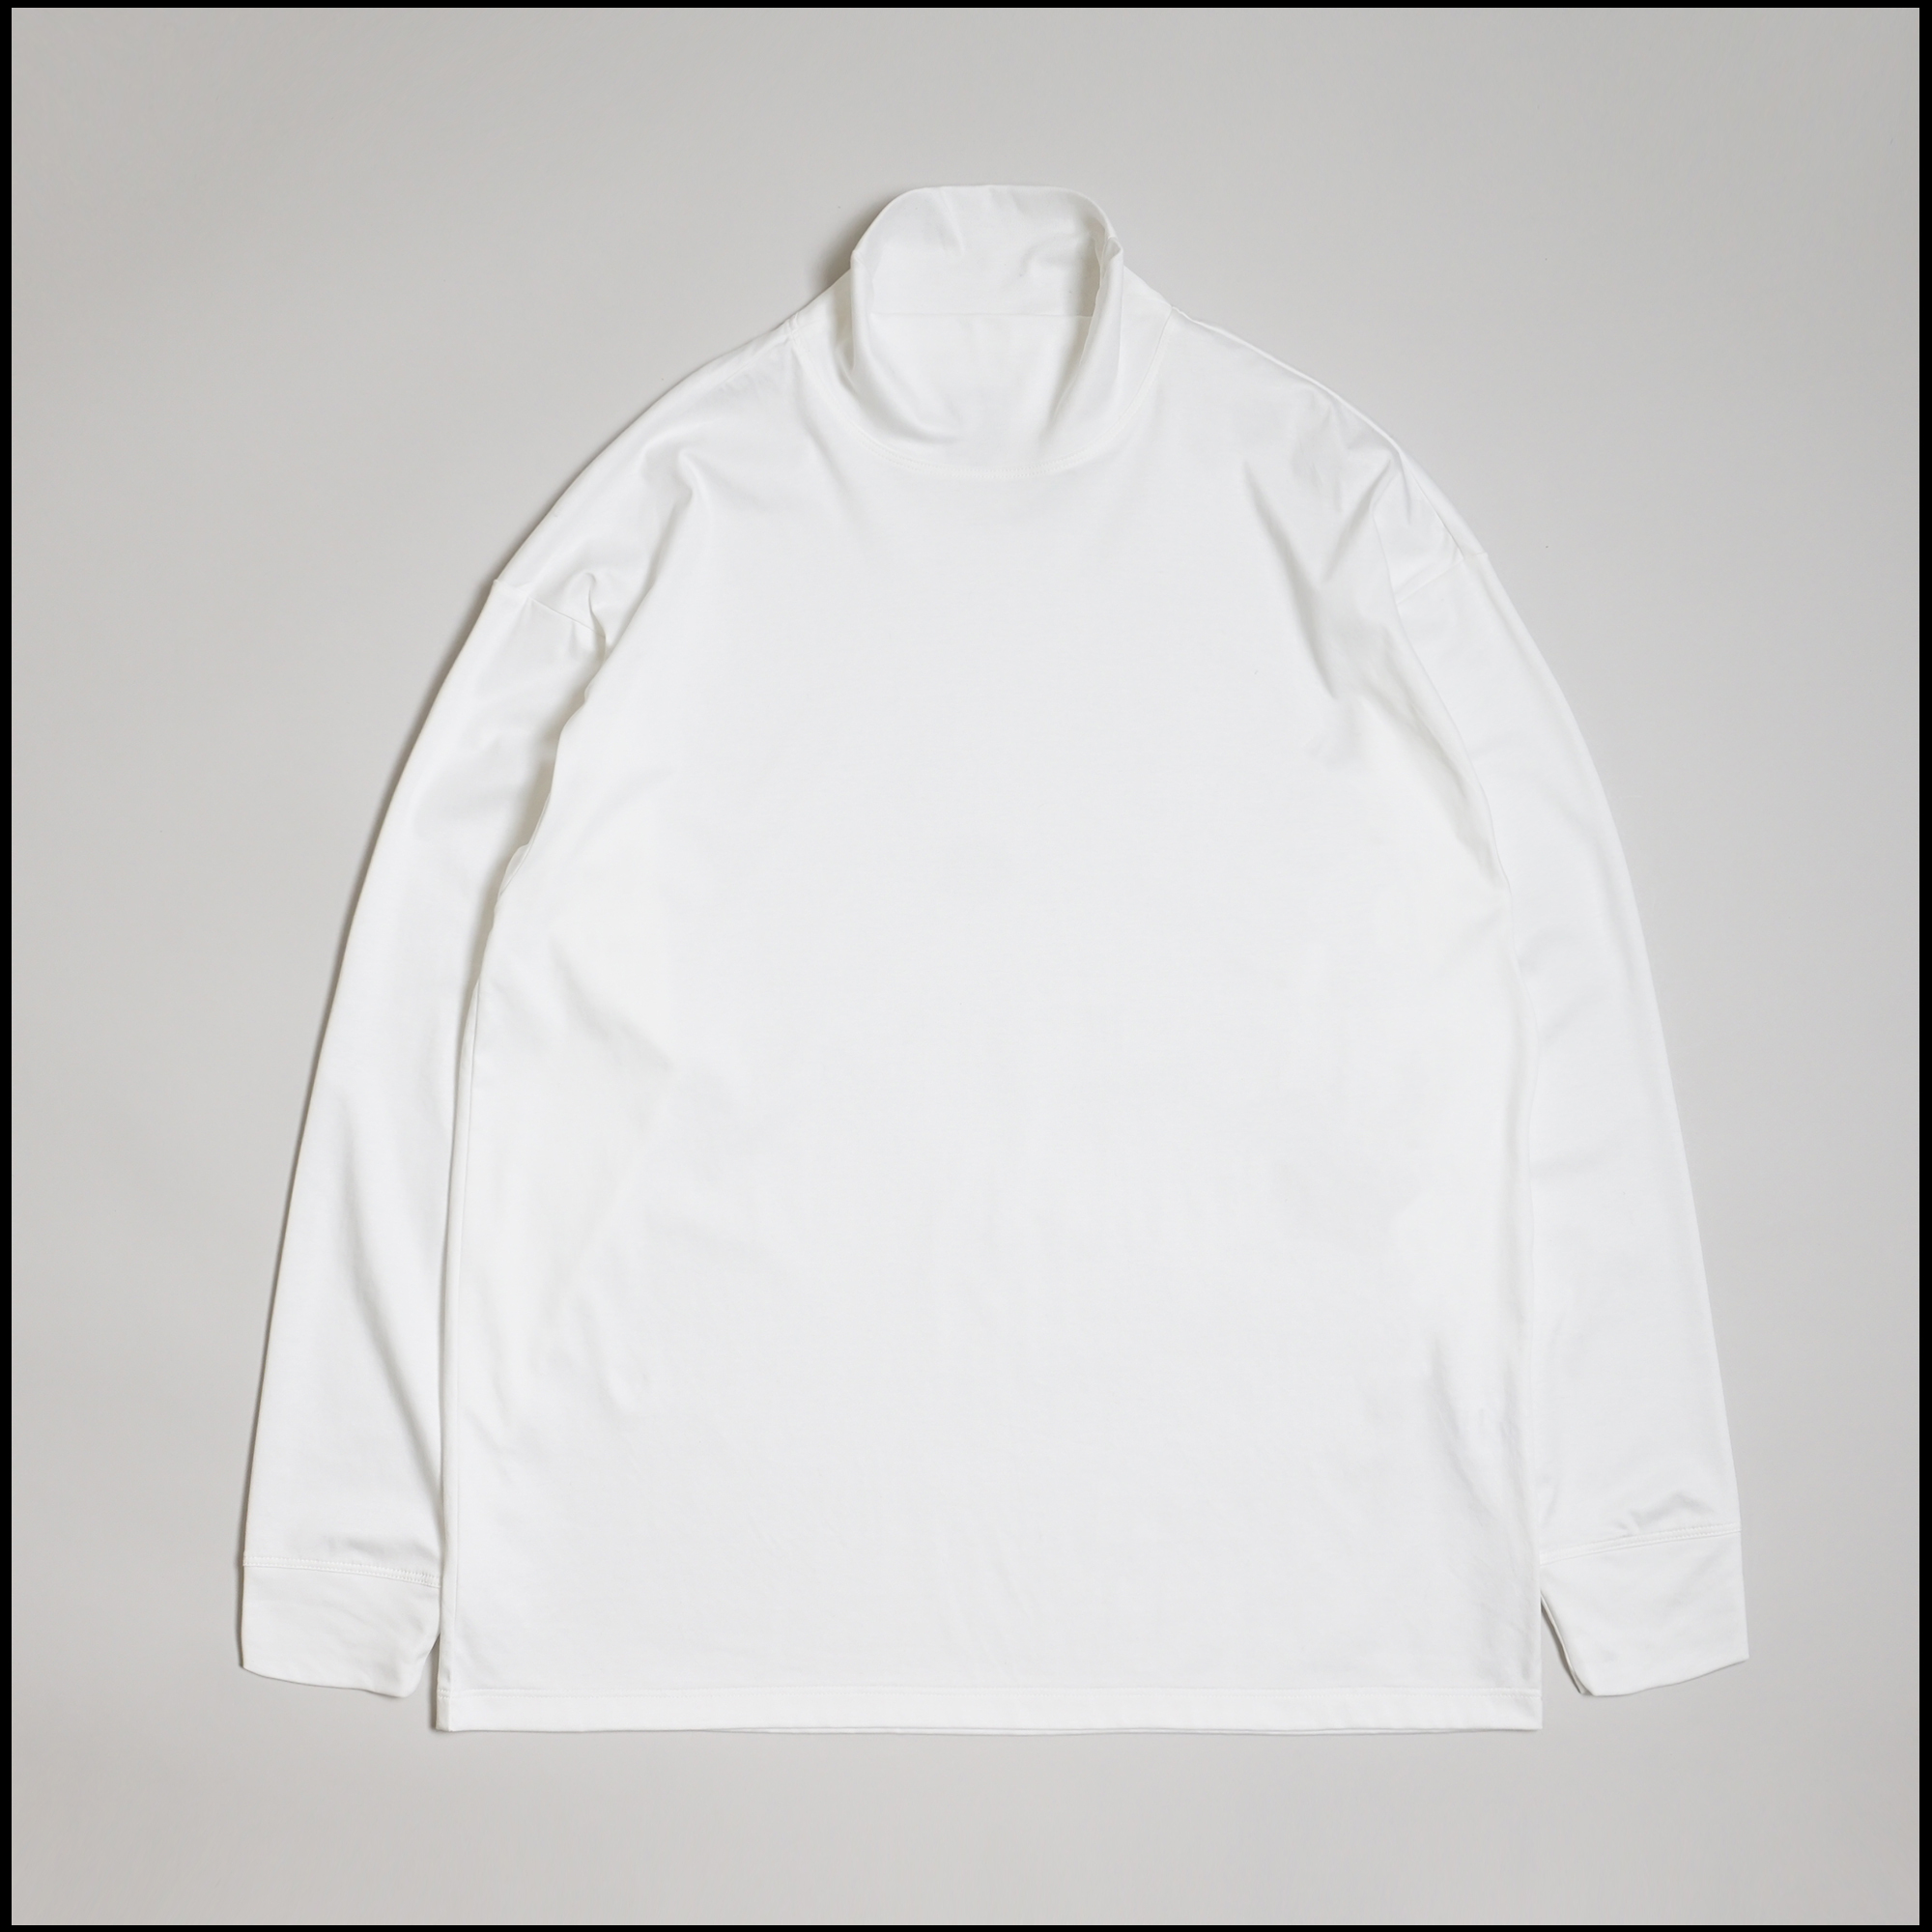 Night Tee in White color by Arpenteur for C'H'C'M'